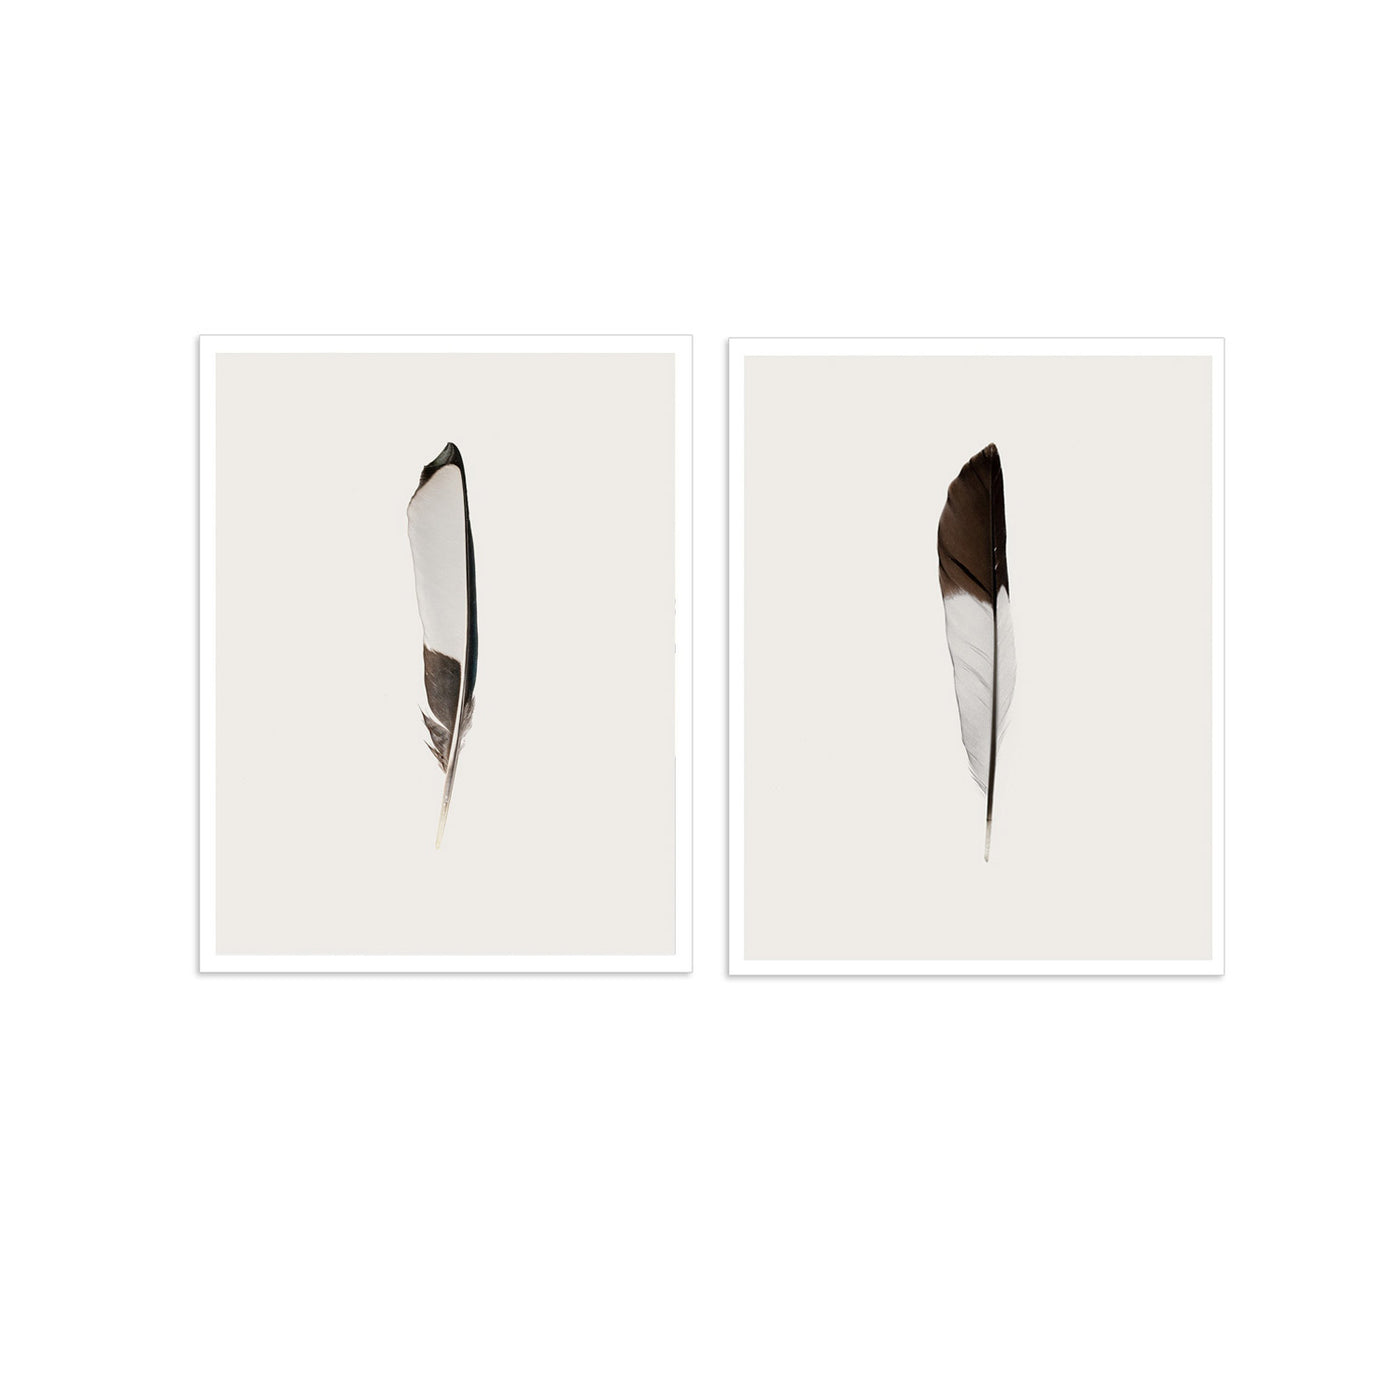 SALE - Feathers (Set of 2)